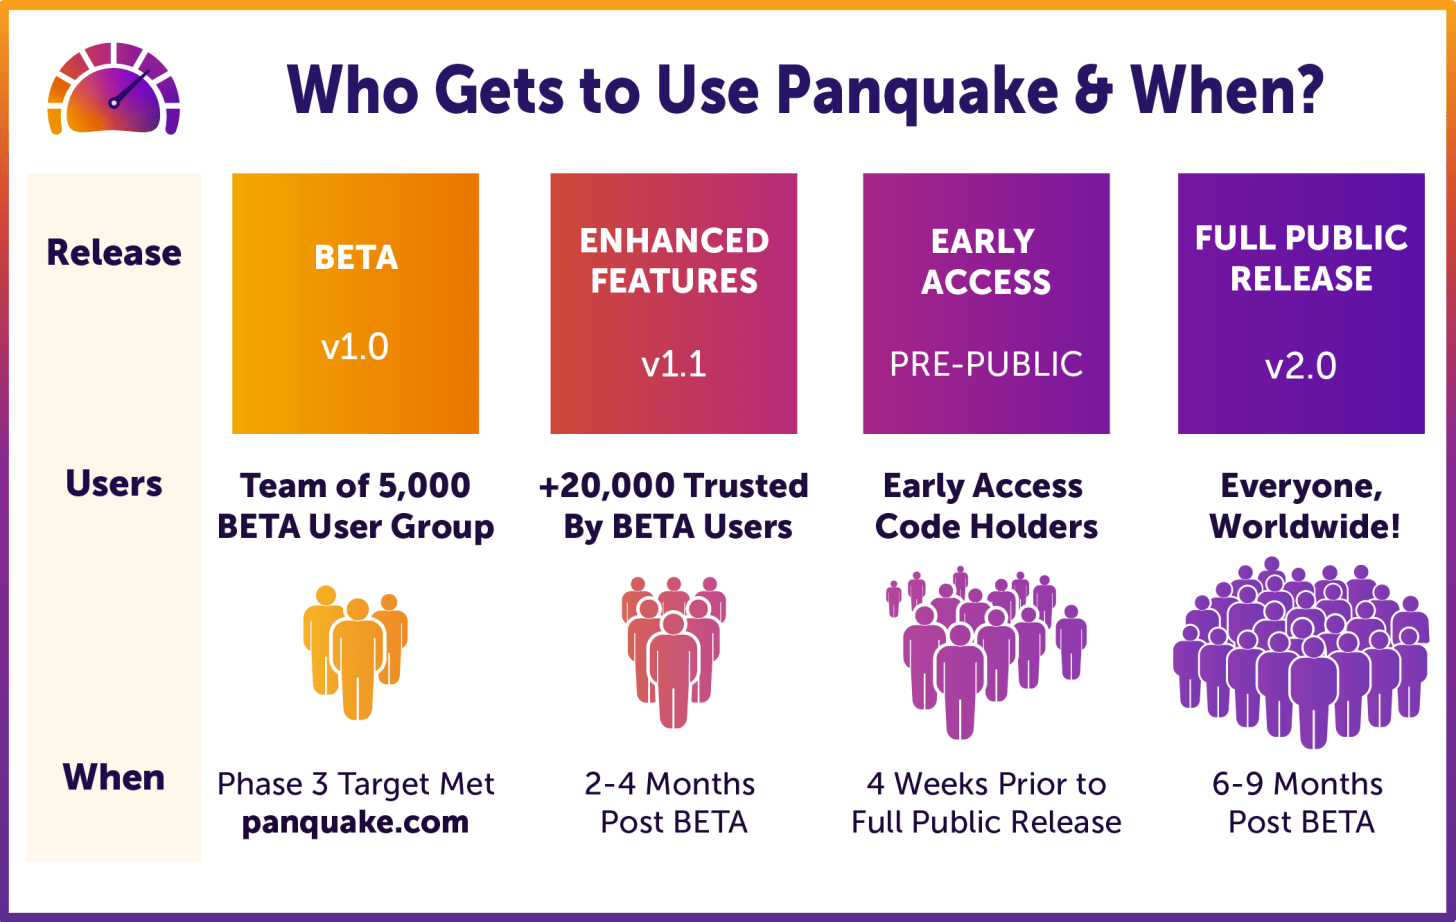 Image: Who Gets to Use Panquake &amp; When? Color: Purple. Direction: Left to Right. Release. BETA v 1.0. Users. Team of 5,000 BETA User Group. When. Phase 3 Target Met panquake.com. Release. Enhanced Features v 1.1. Users. +20,000 Trusted By BETA Users. When. 2-4 Months Post BETA. Release. Early Access Pre-Public. Users. Early Access Code Holders. When 4 Weeks Prior to Full Public Release. Release. Full Public Release v 2.0. Users. Everyone, Worldwide! When. 6-9 Months Post BETA.